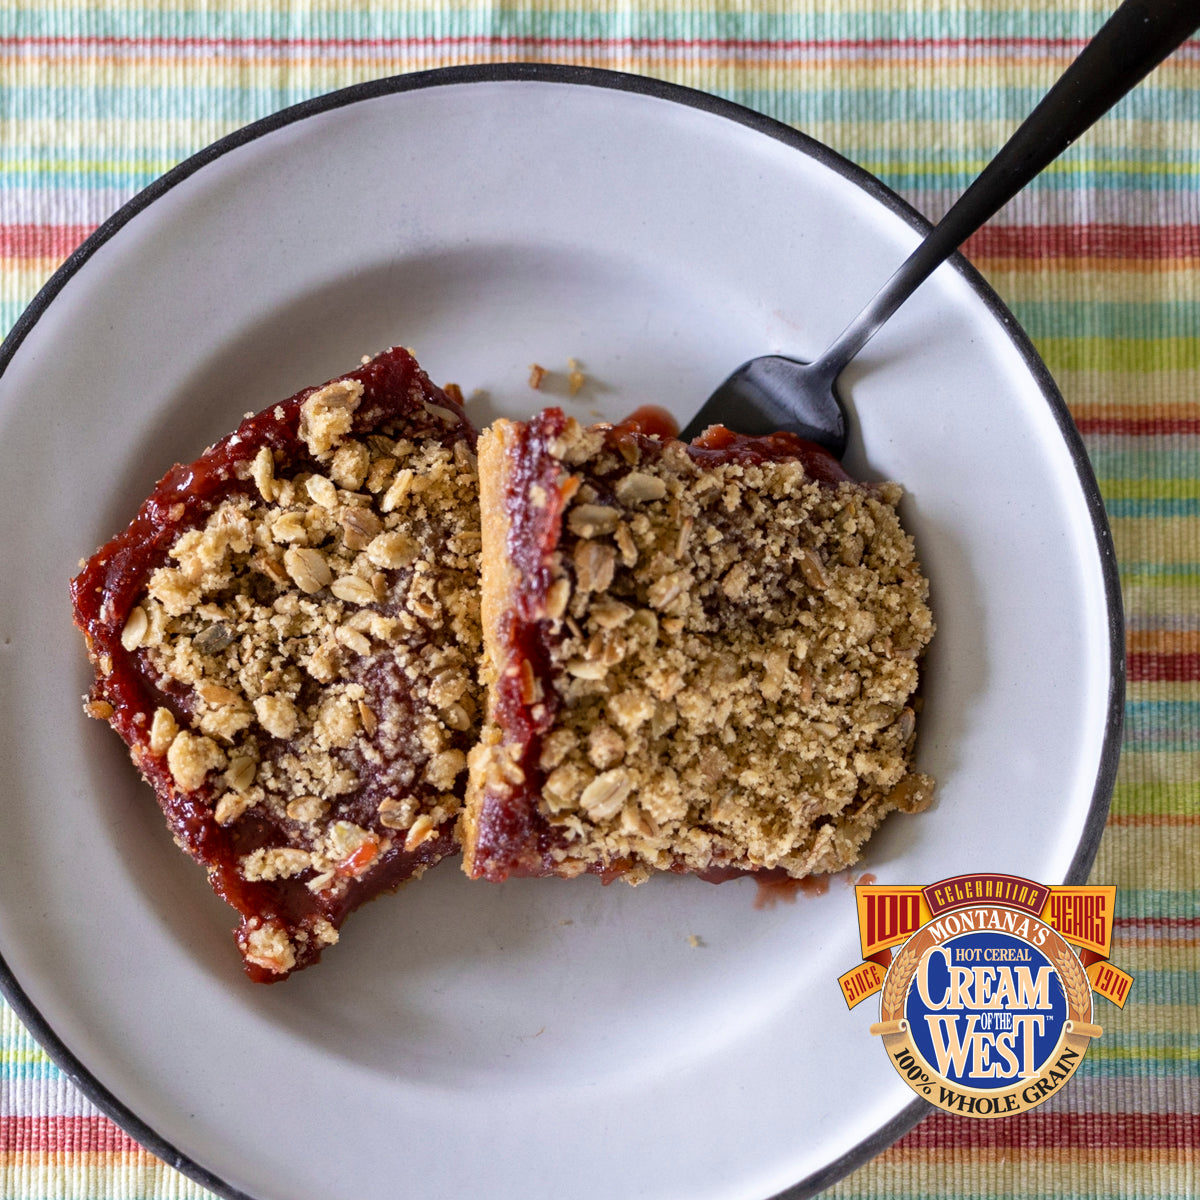 A delicious blend of spring and summer with a buttery, crunchy Cream of the West Roasted 7-Grain crust. This recipe is just as delicious using other berries! Substitute blueberries, blackberries, raspberries… in equal measure. (3 cups)